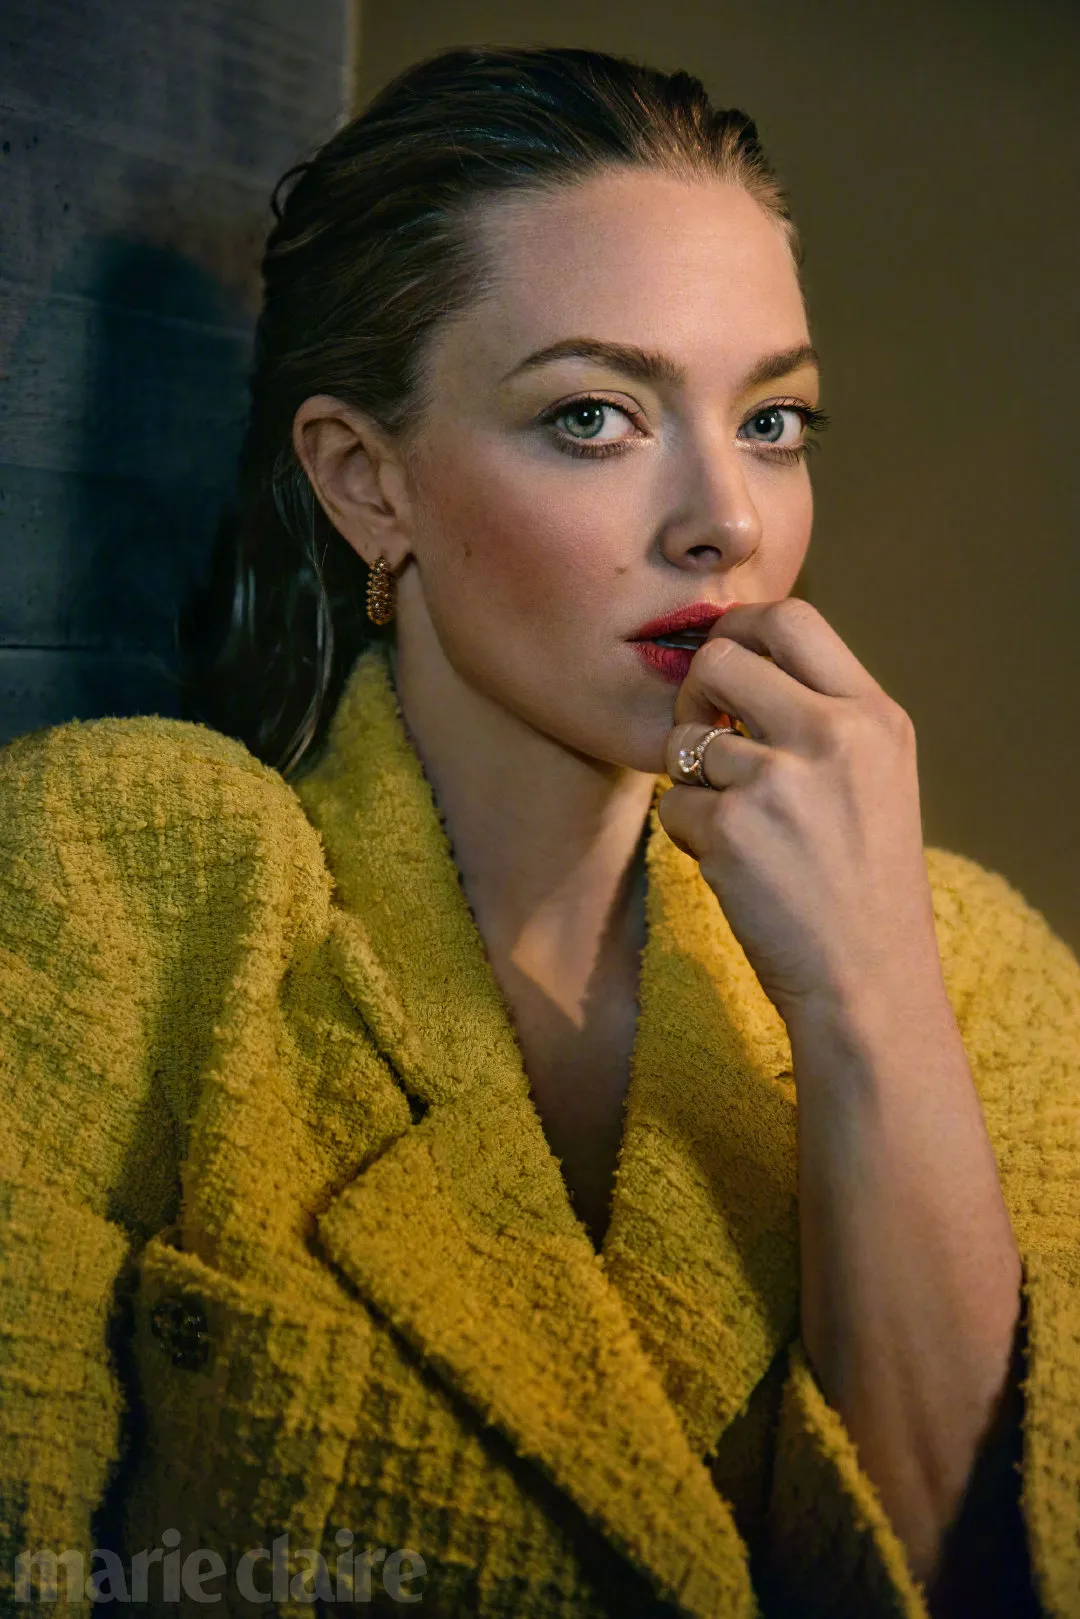 Amanda Seyfried, photo in the May issue of "The Beauty" of "Marie Claire" magazine